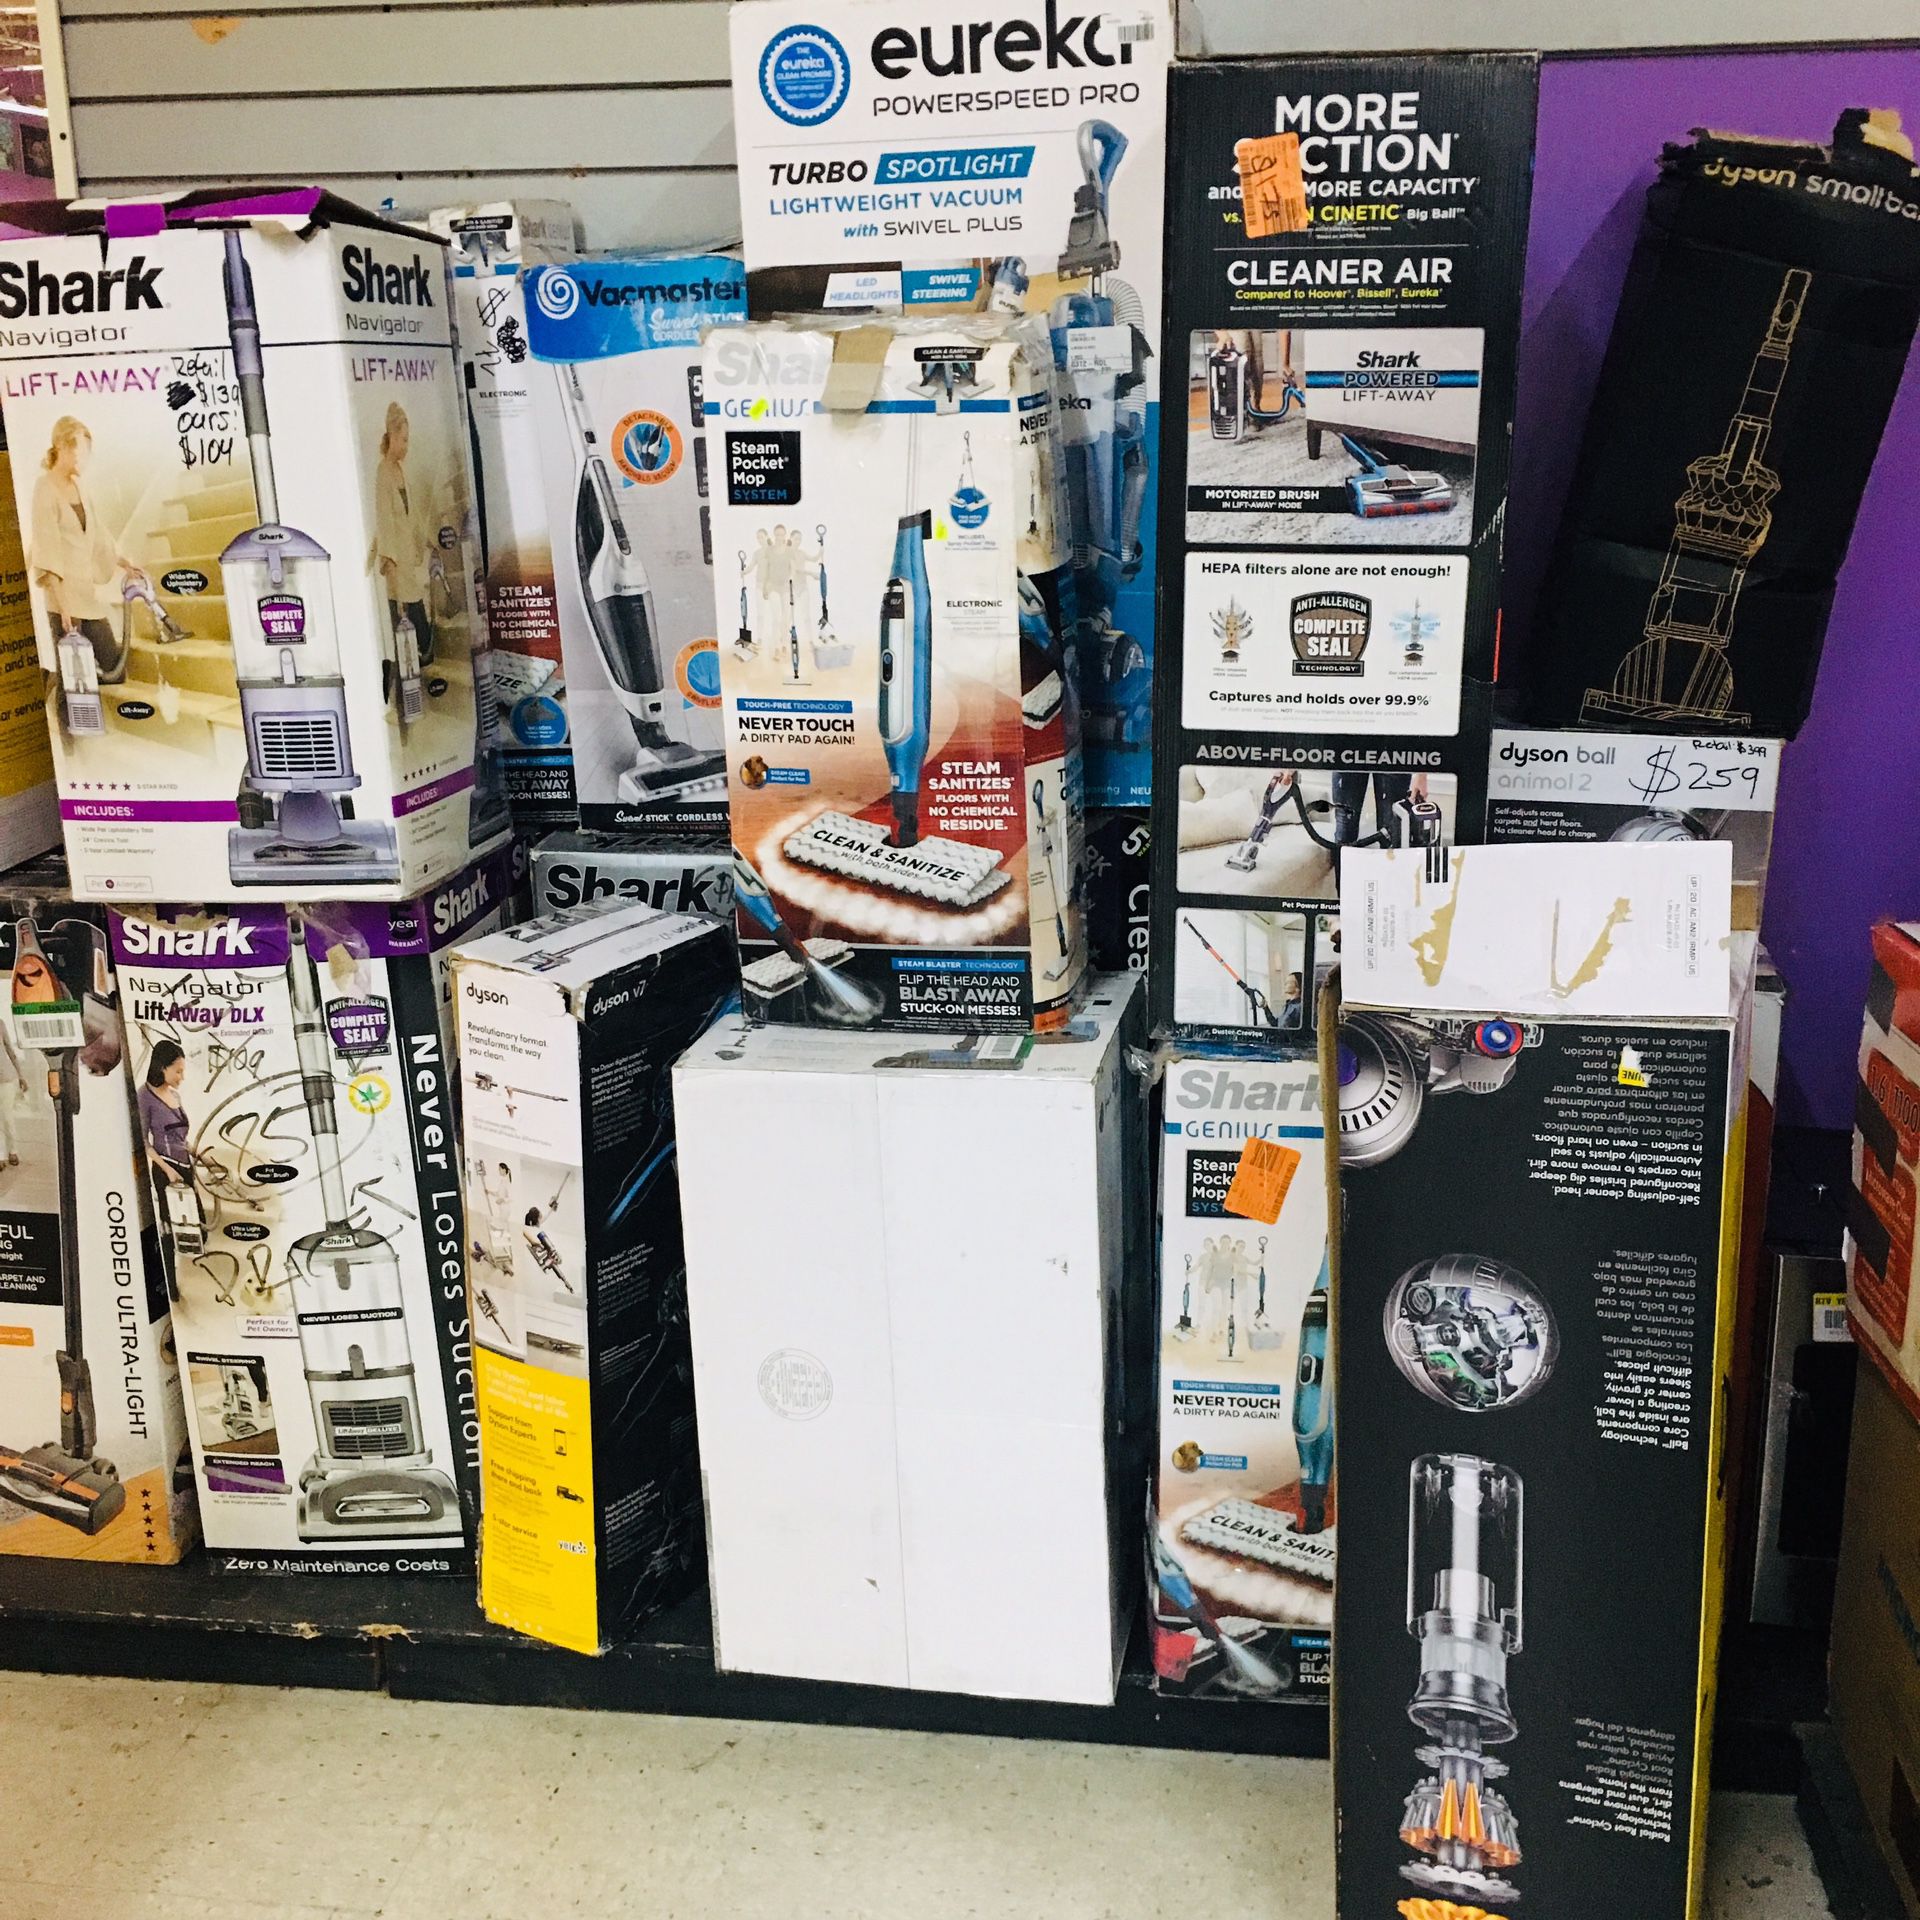 Huge Variety on Vacuums in different Styles sizes and colors from the brands Shark, Dyson, Vacmaster, Hoover, Kärcher, Dirt evil, Ryobi and many more